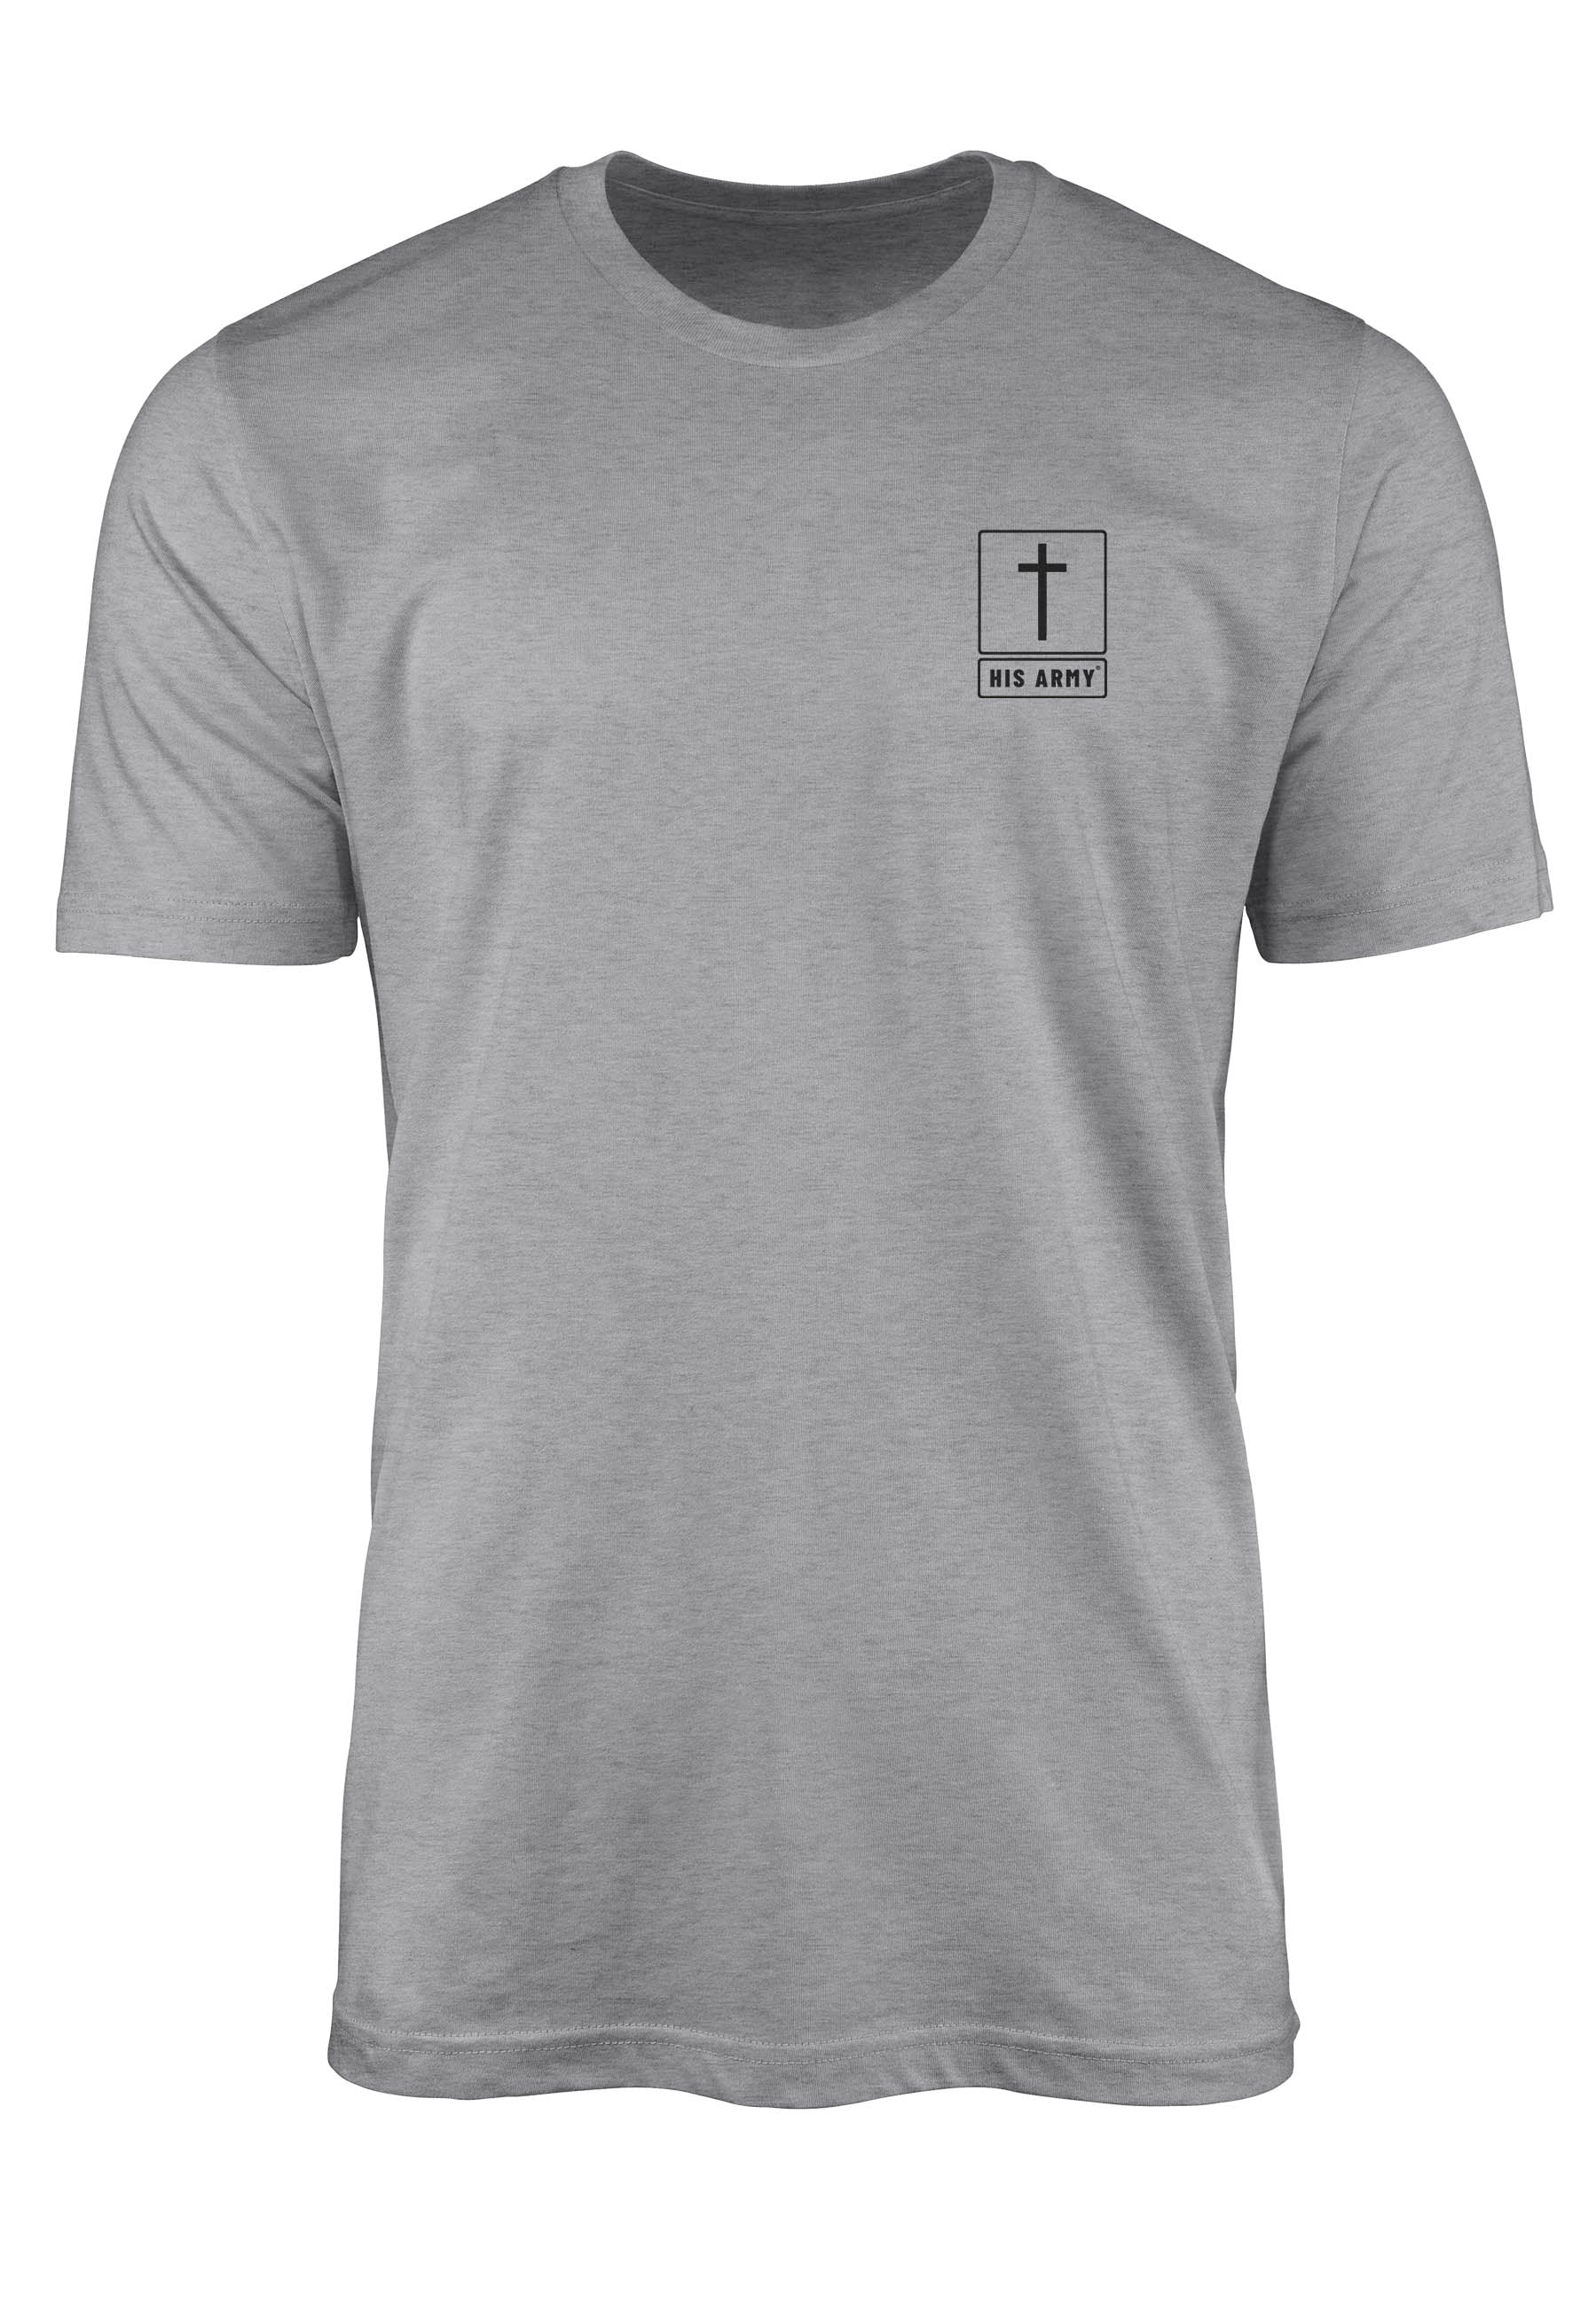 Left chest print on Jesus t-shirt from His Army